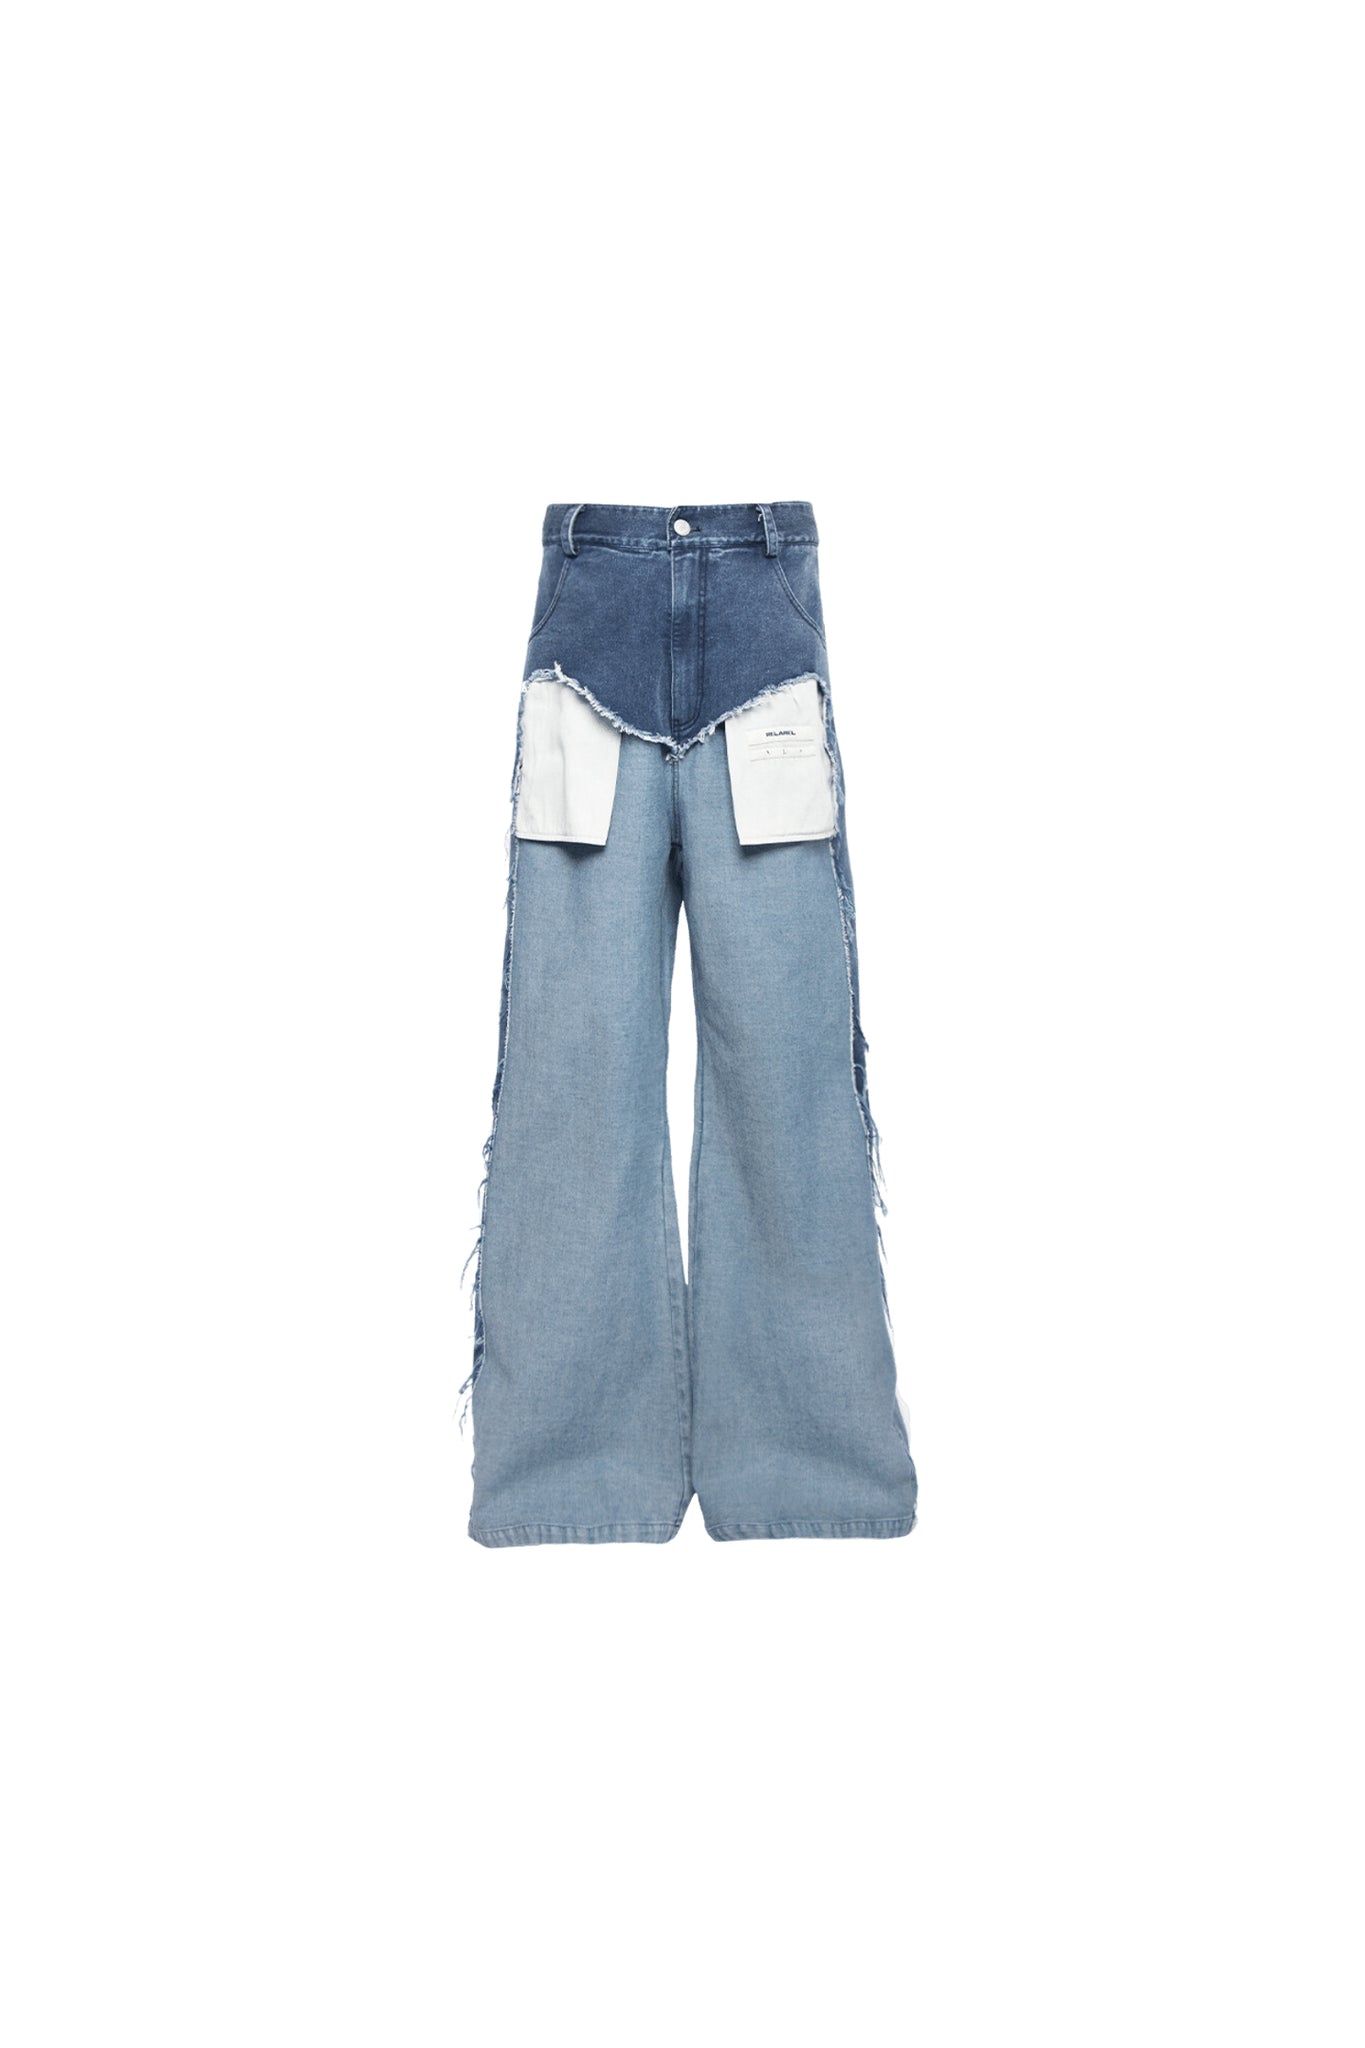 Deconstructed Washed Frayed Edge Jeans